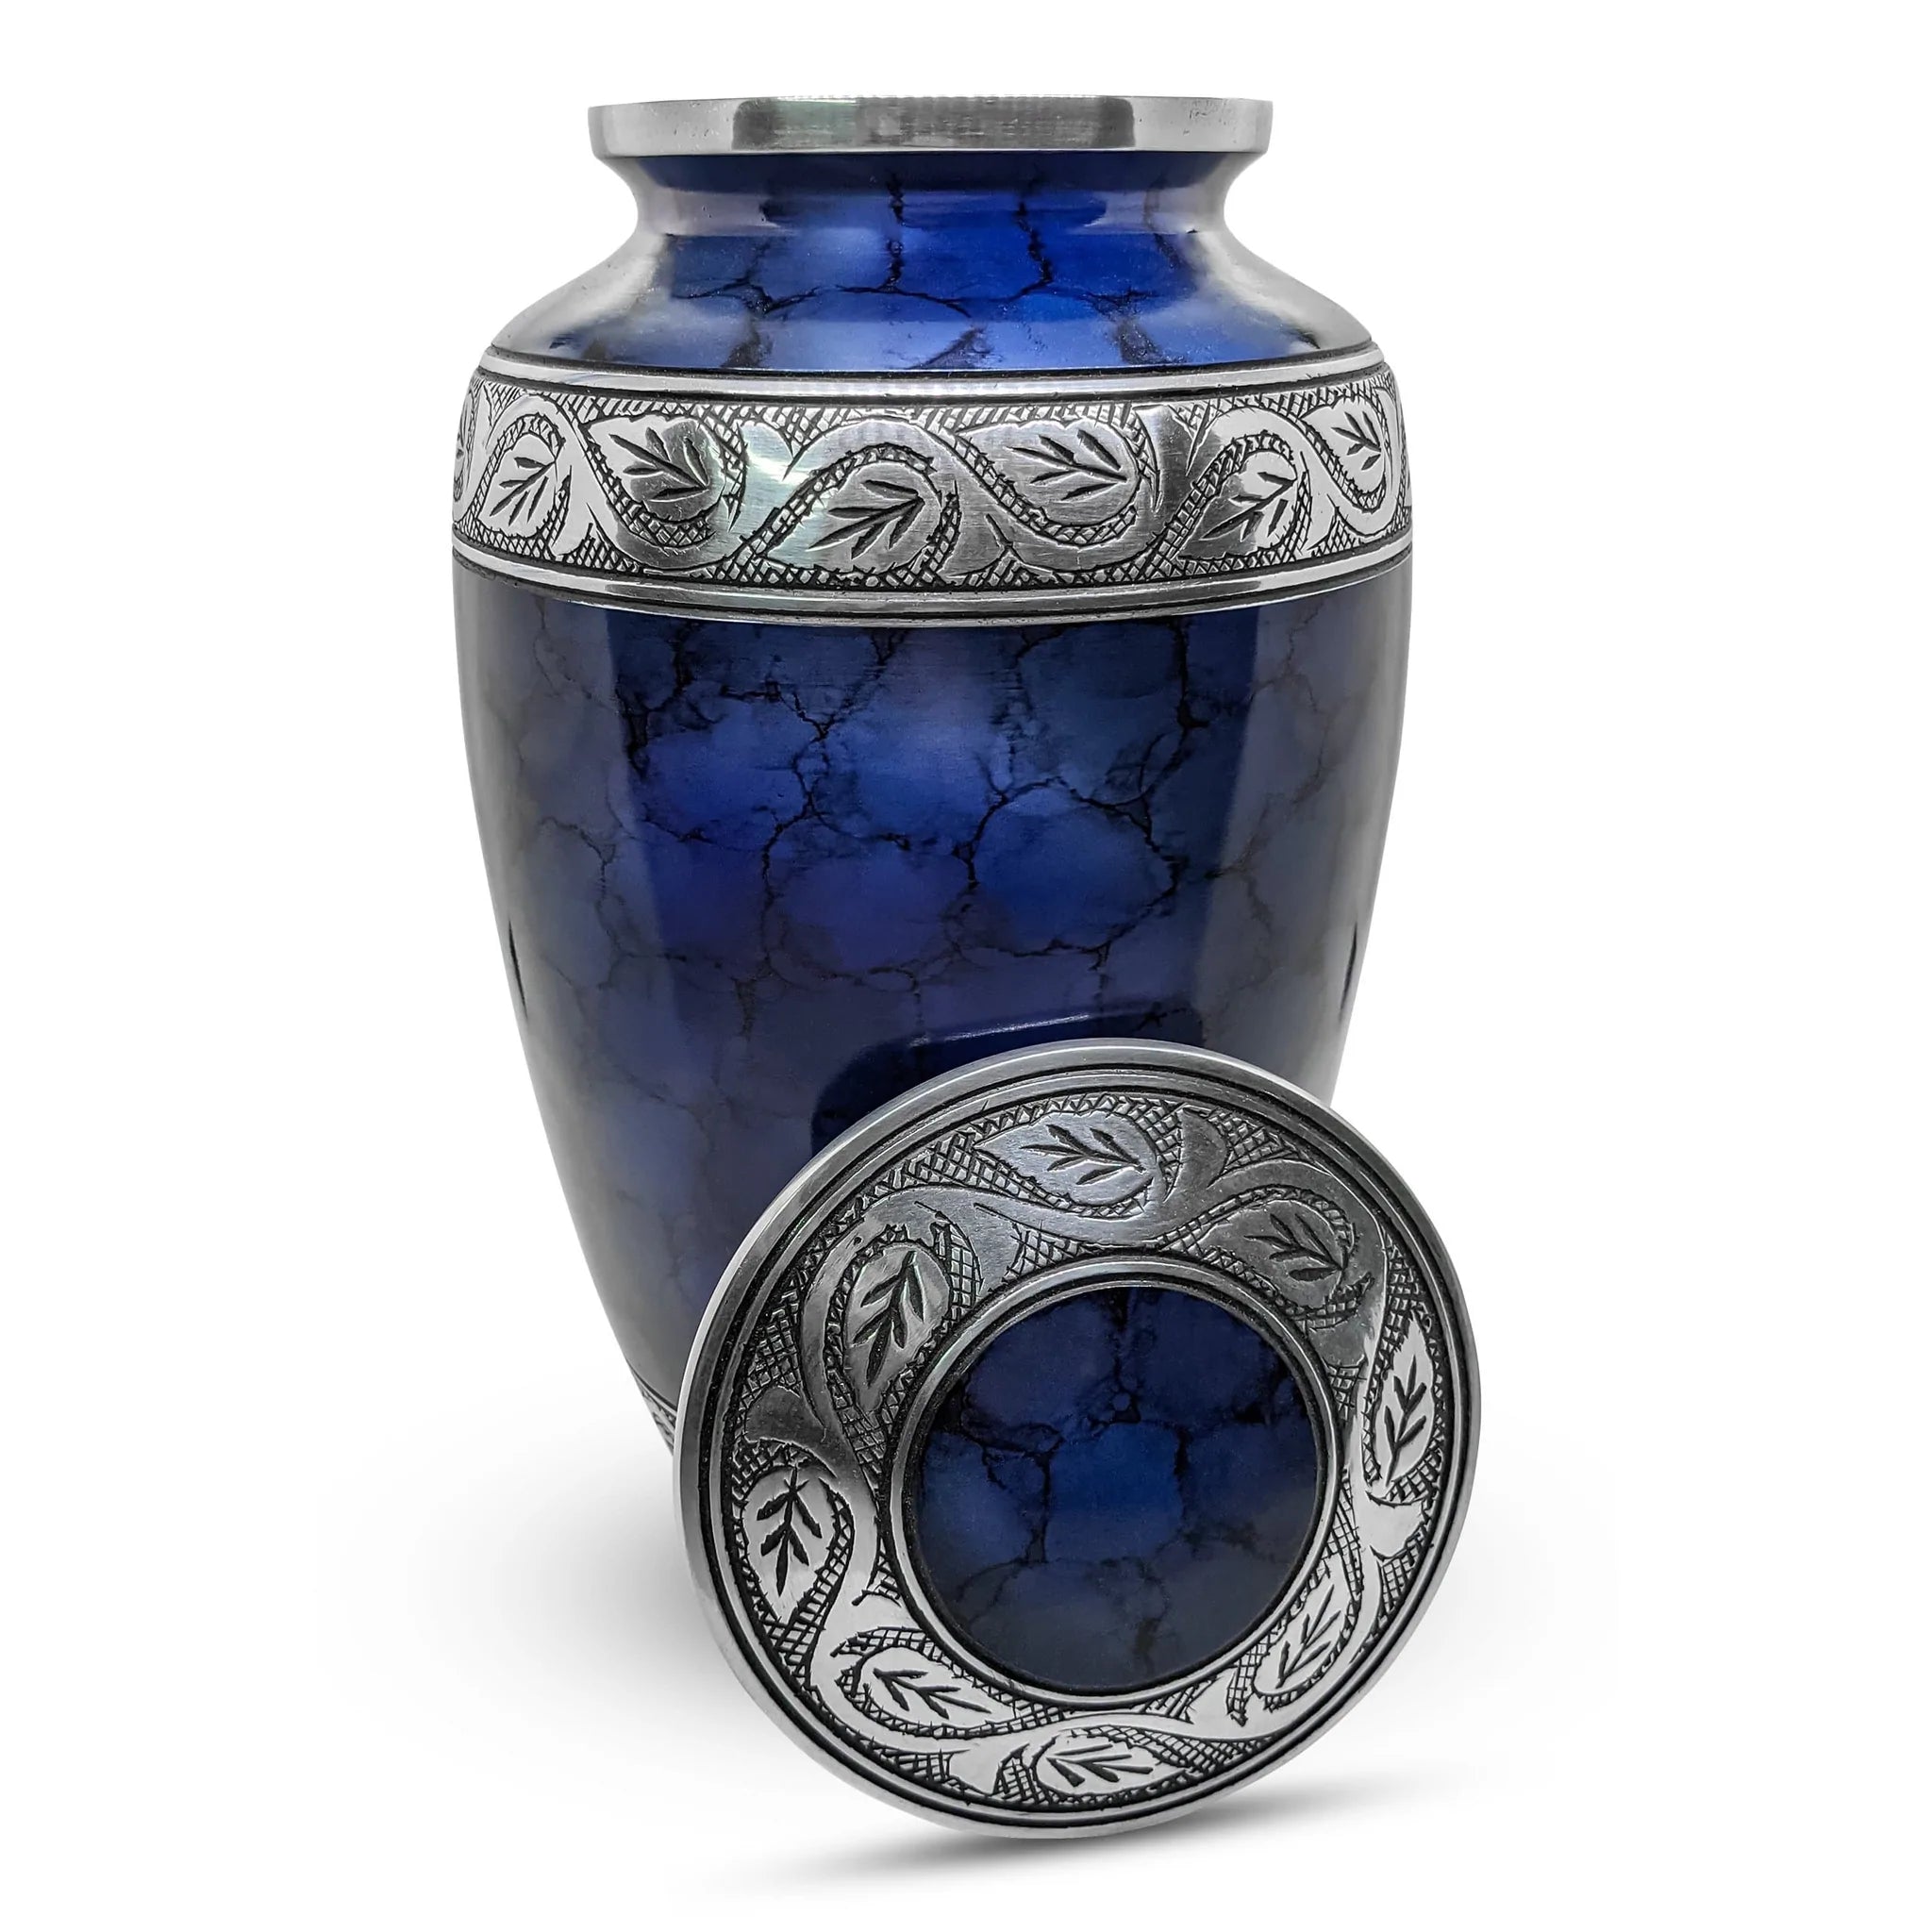 10 Blue Cremation Urn Types for a Loved One’s Ashes